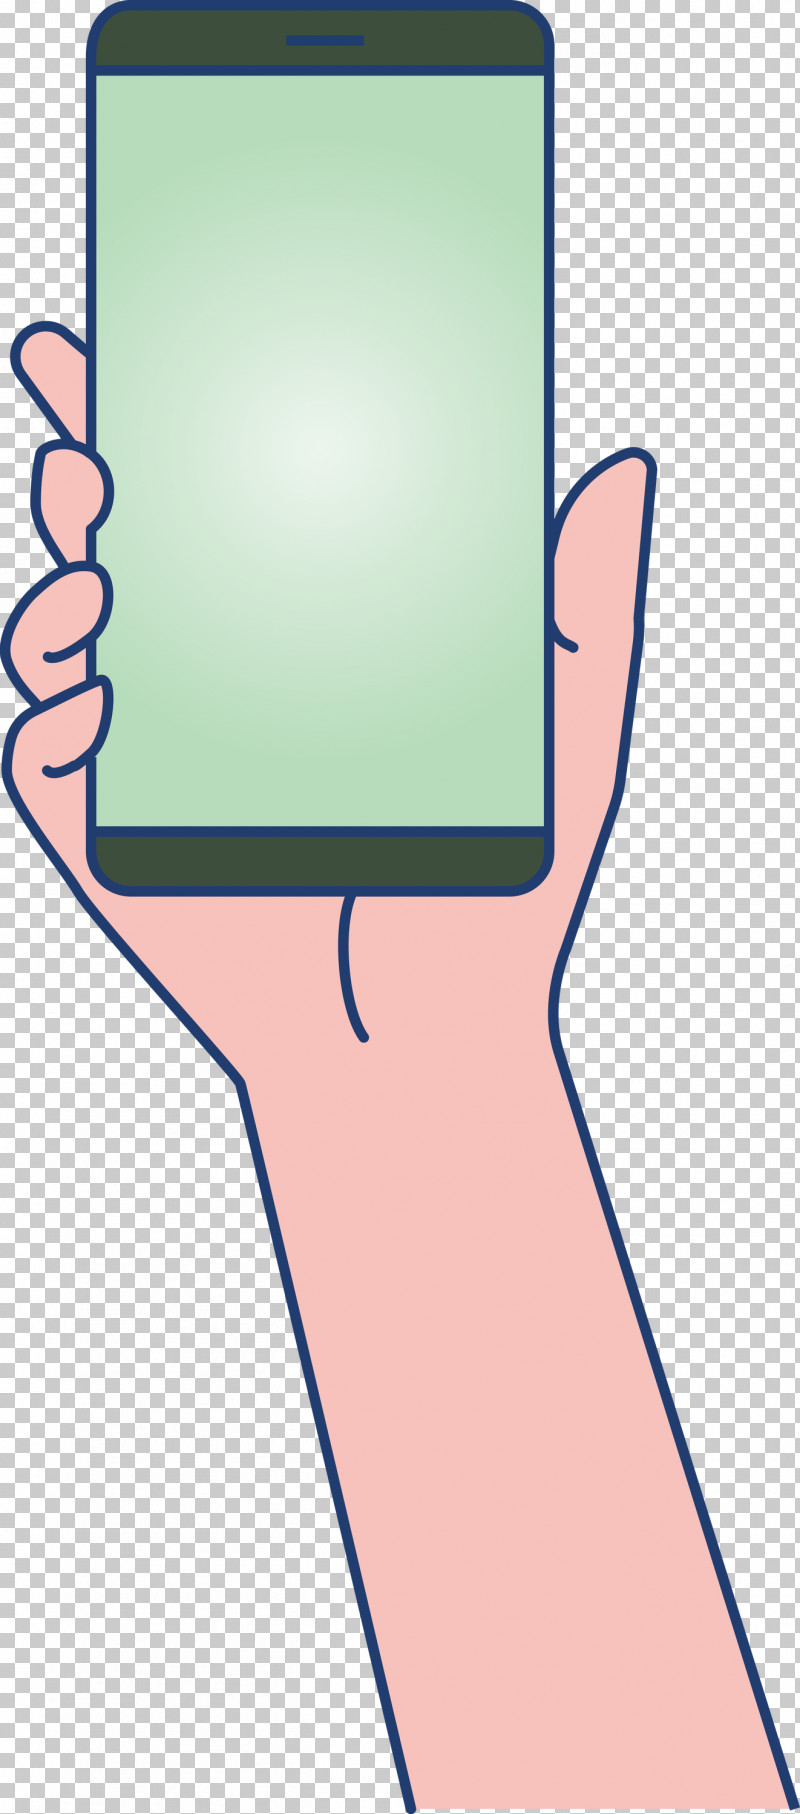 Smartphone Hand PNG, Clipart, Cartoon, Geometry, Hand, Hm, Line Free PNG Download